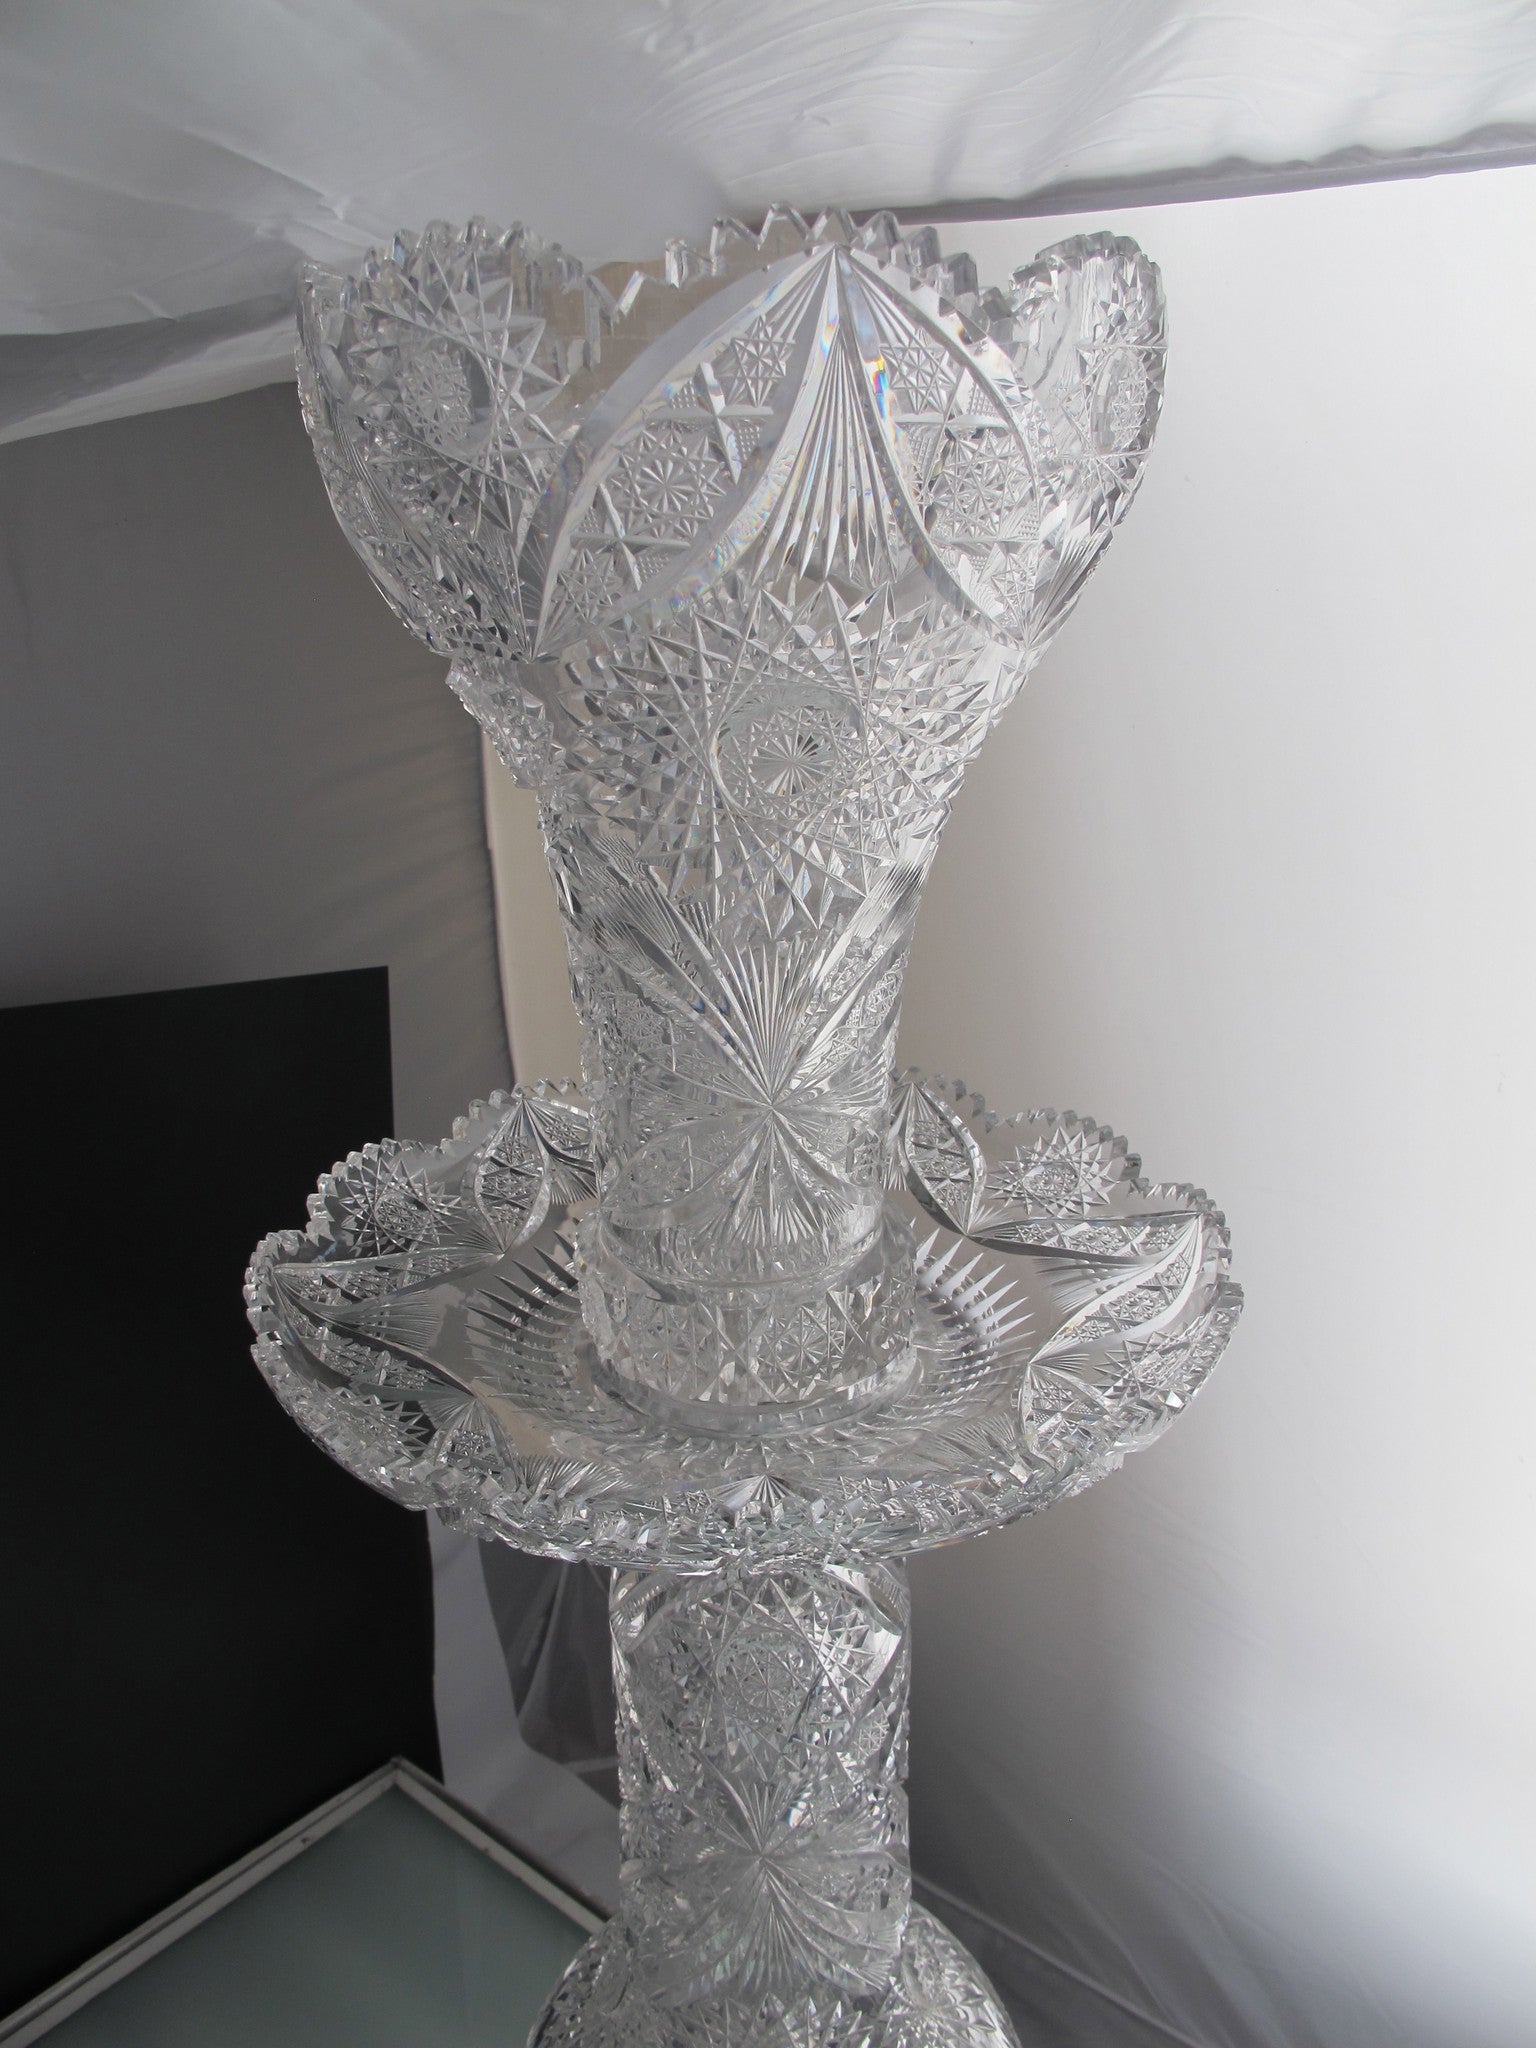 4 part American Brilliant Period Cut Glass vase ABP - O'Rourke crystal awards & gifts abp cut glass